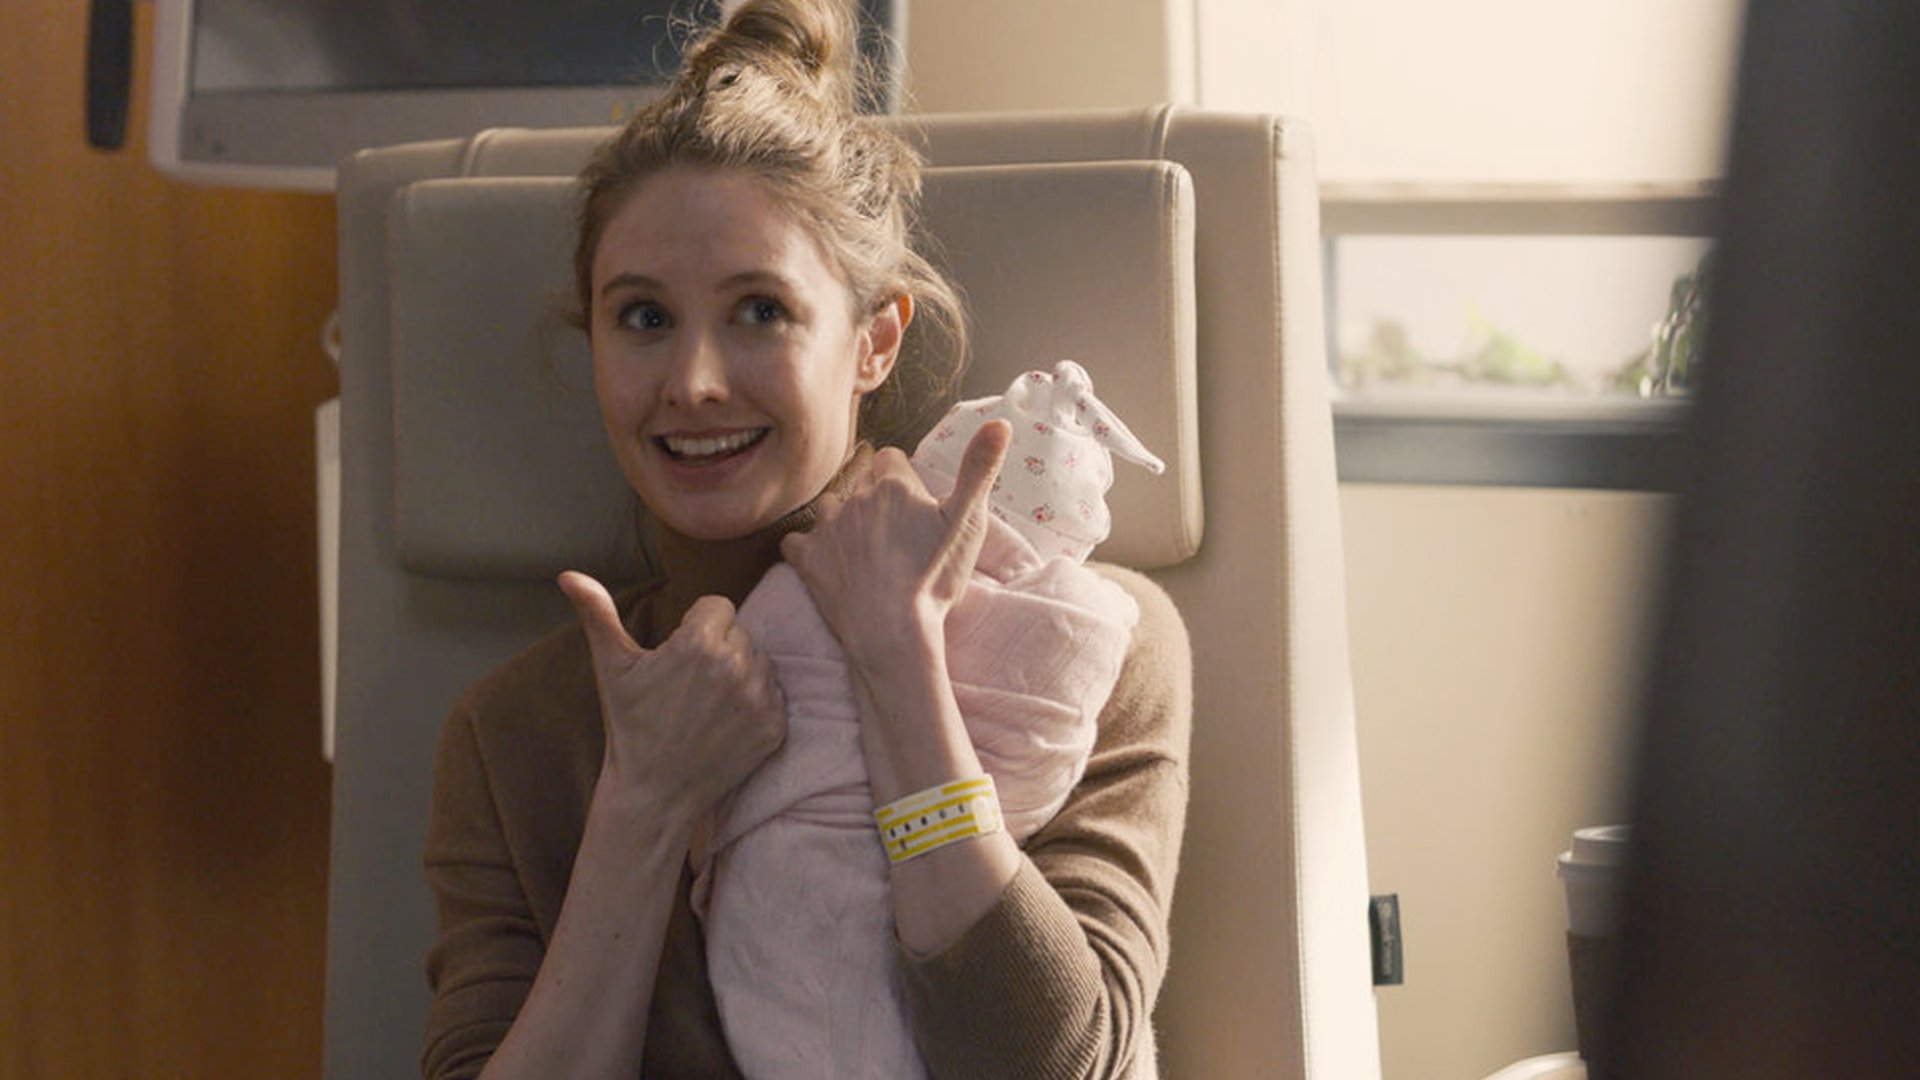 Caitlin Thompson as Madison holding a baby with her thumbs up on ‘This Is Us’ Season 5 Episode 9, ‘The Ride.’